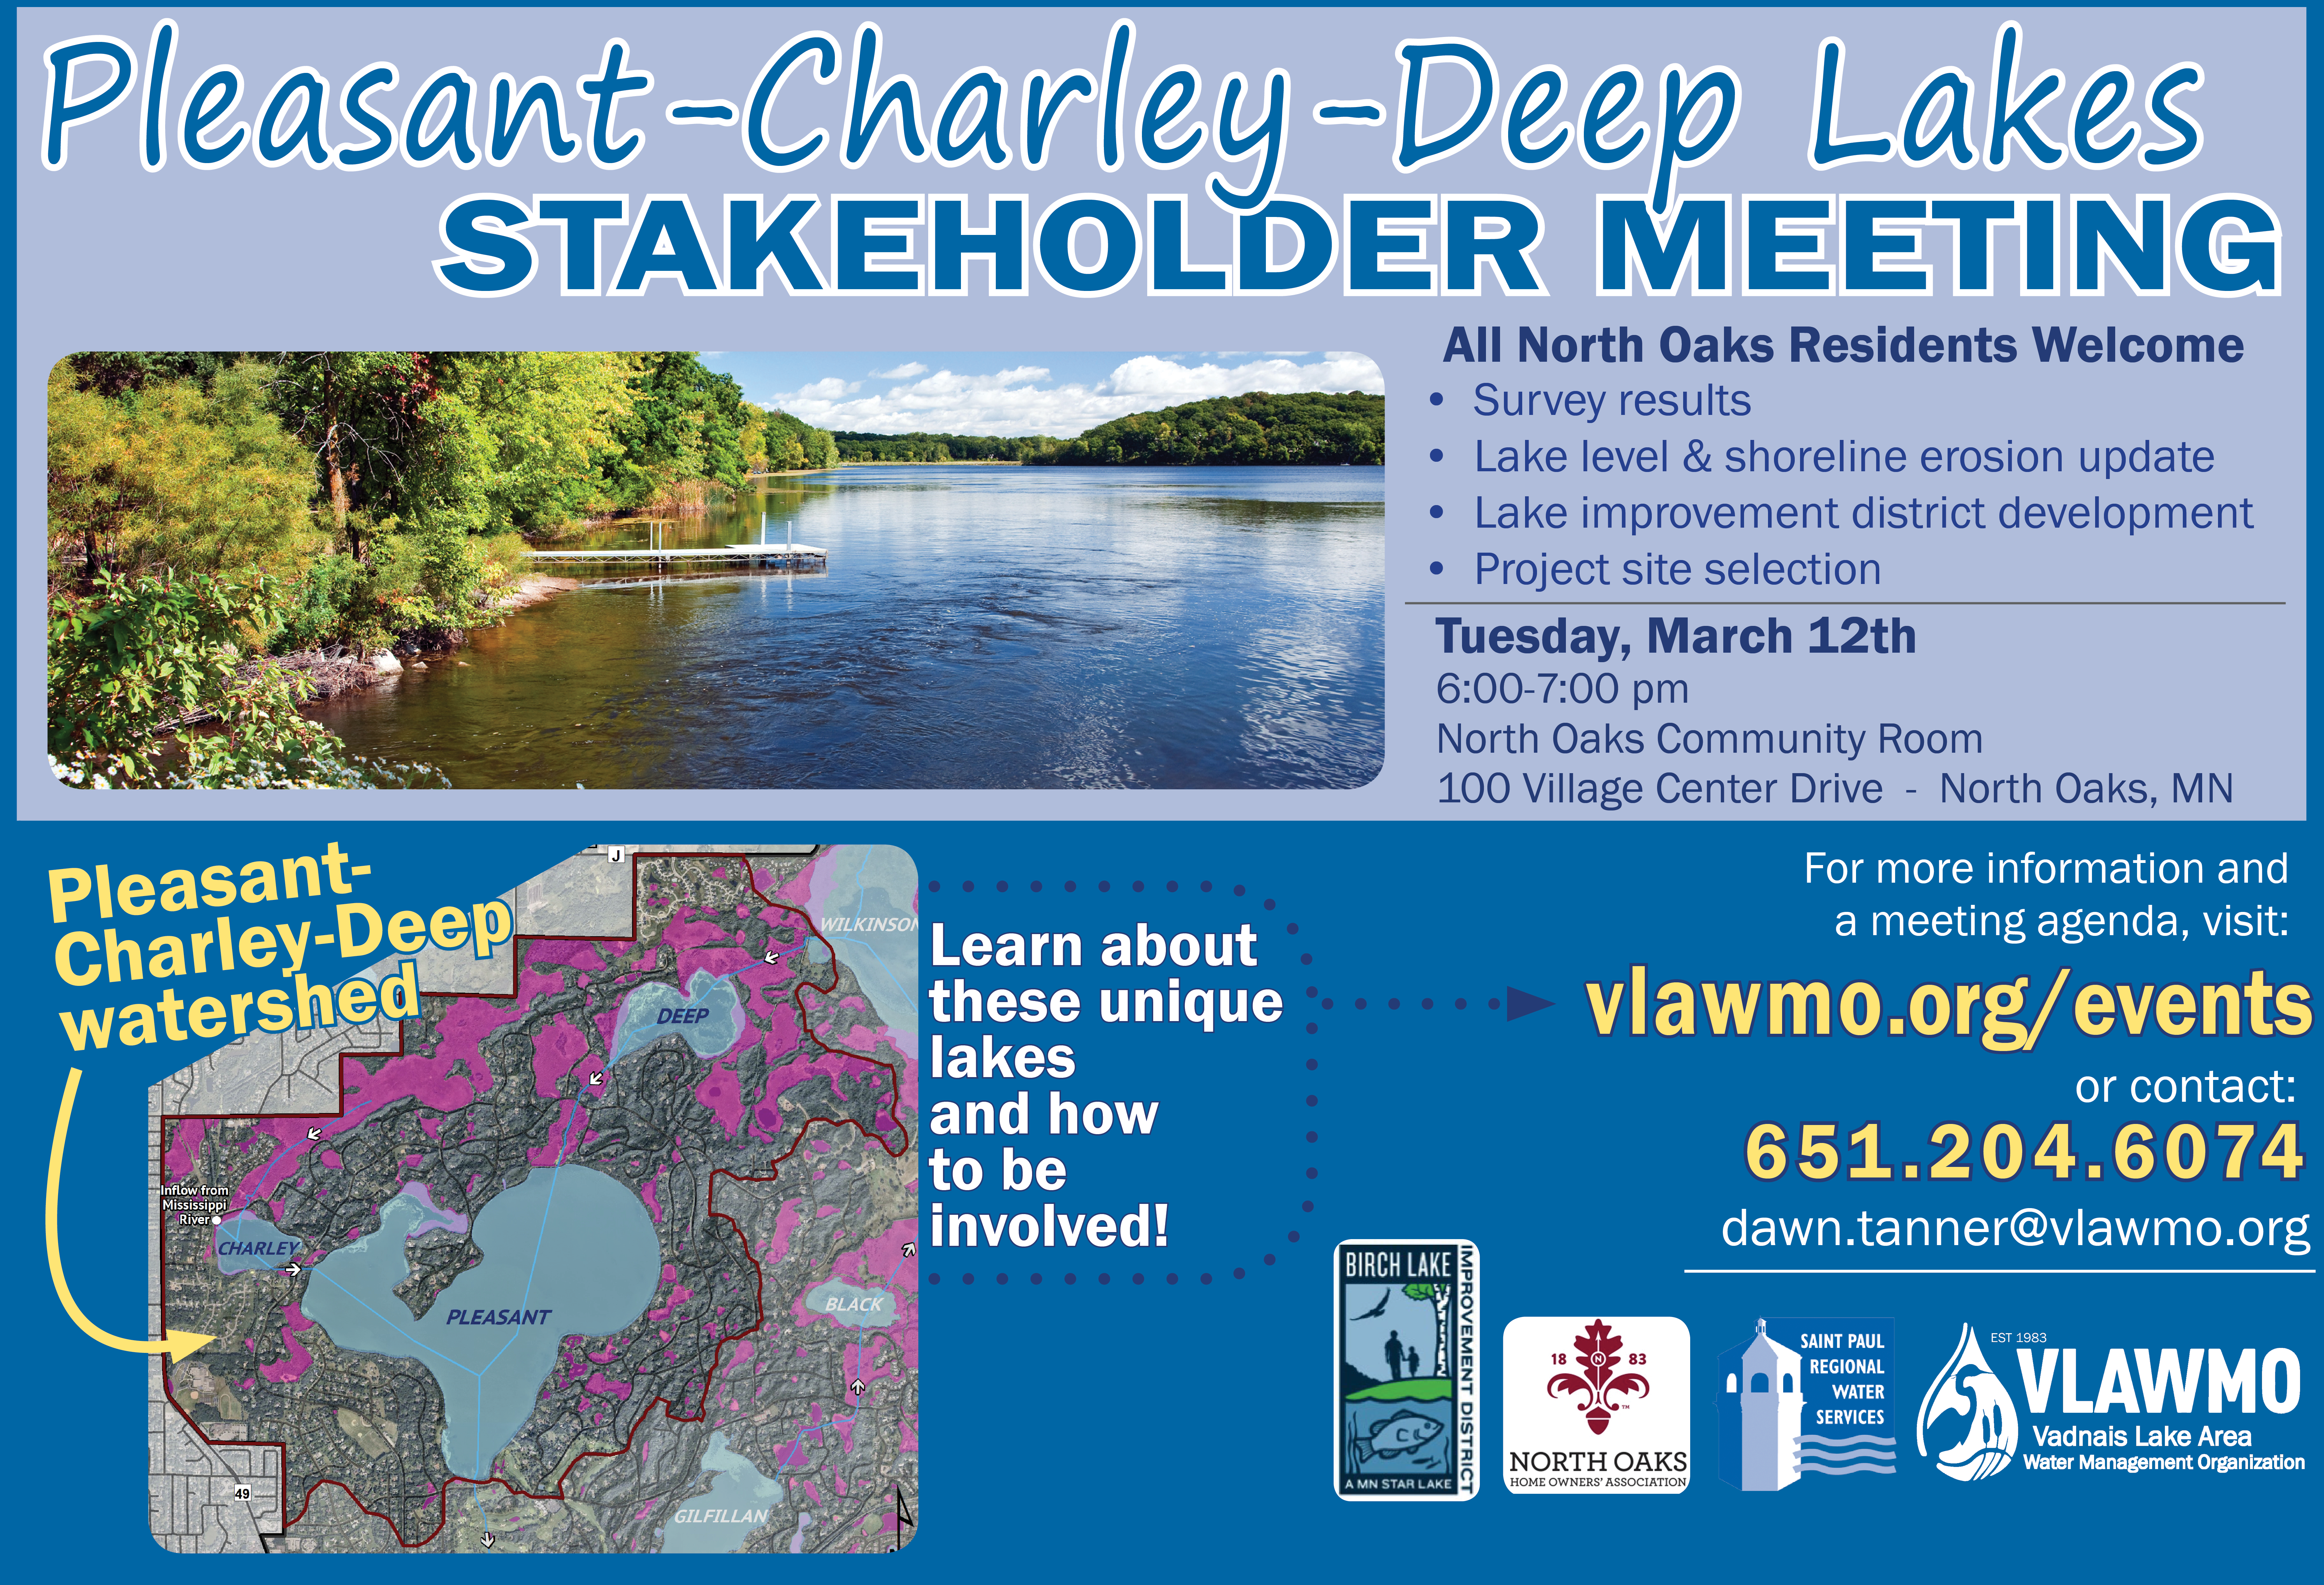 pleasant-charley-deep stakeholder flyer march 12.png